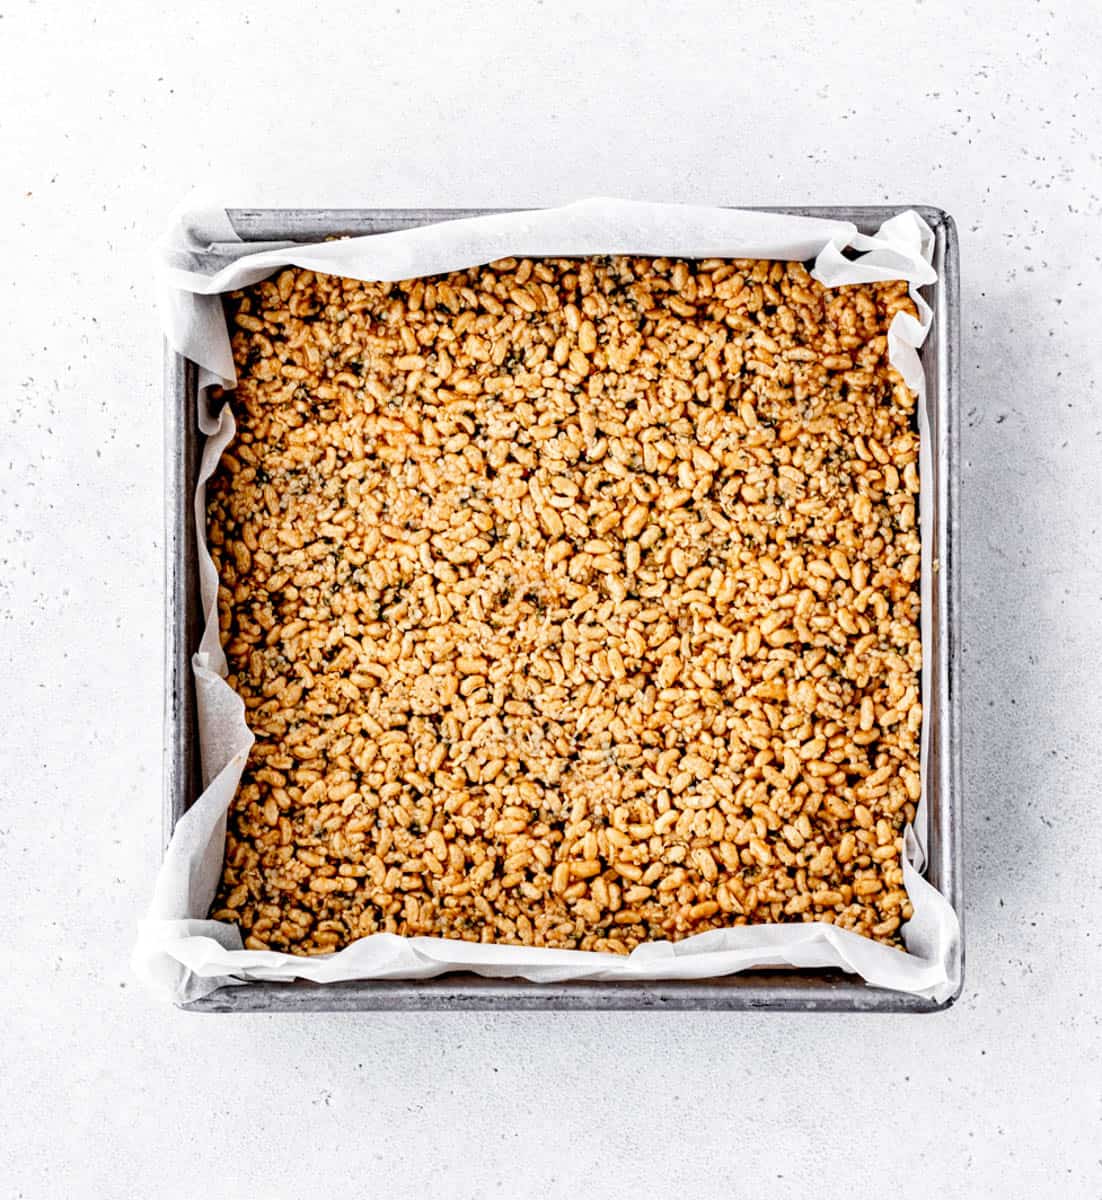 The rice cereal mixture pressed into a pan.